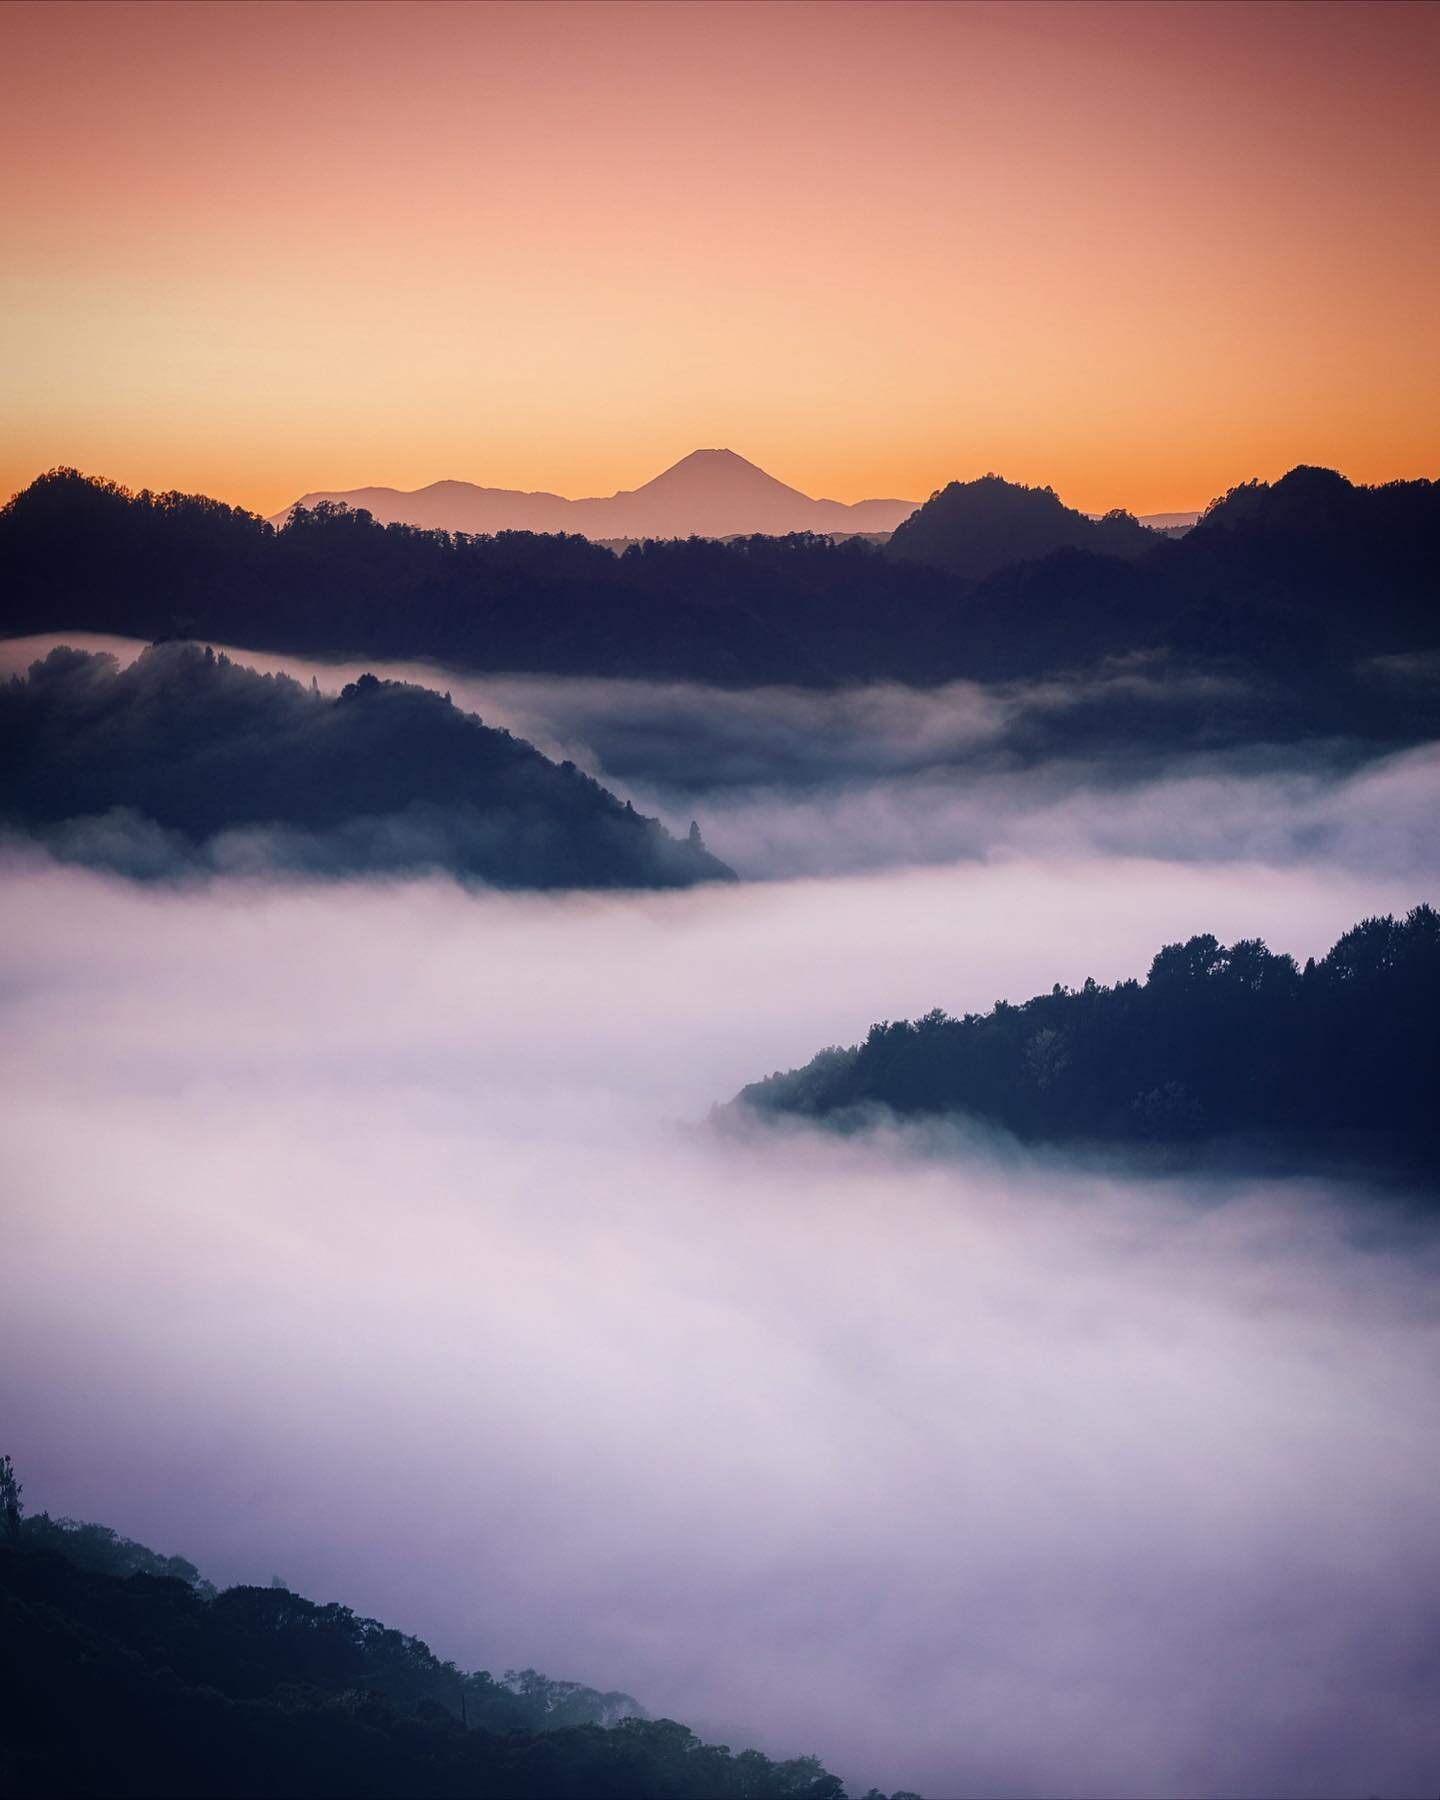 Mornings spent above the clouds at @blue_duck_station station near Whanganui and Tongariro National Parks in the North Island of New Zealand.

I am so ashamed to say that I had never really explored this part of my home country, and didnt realise wha